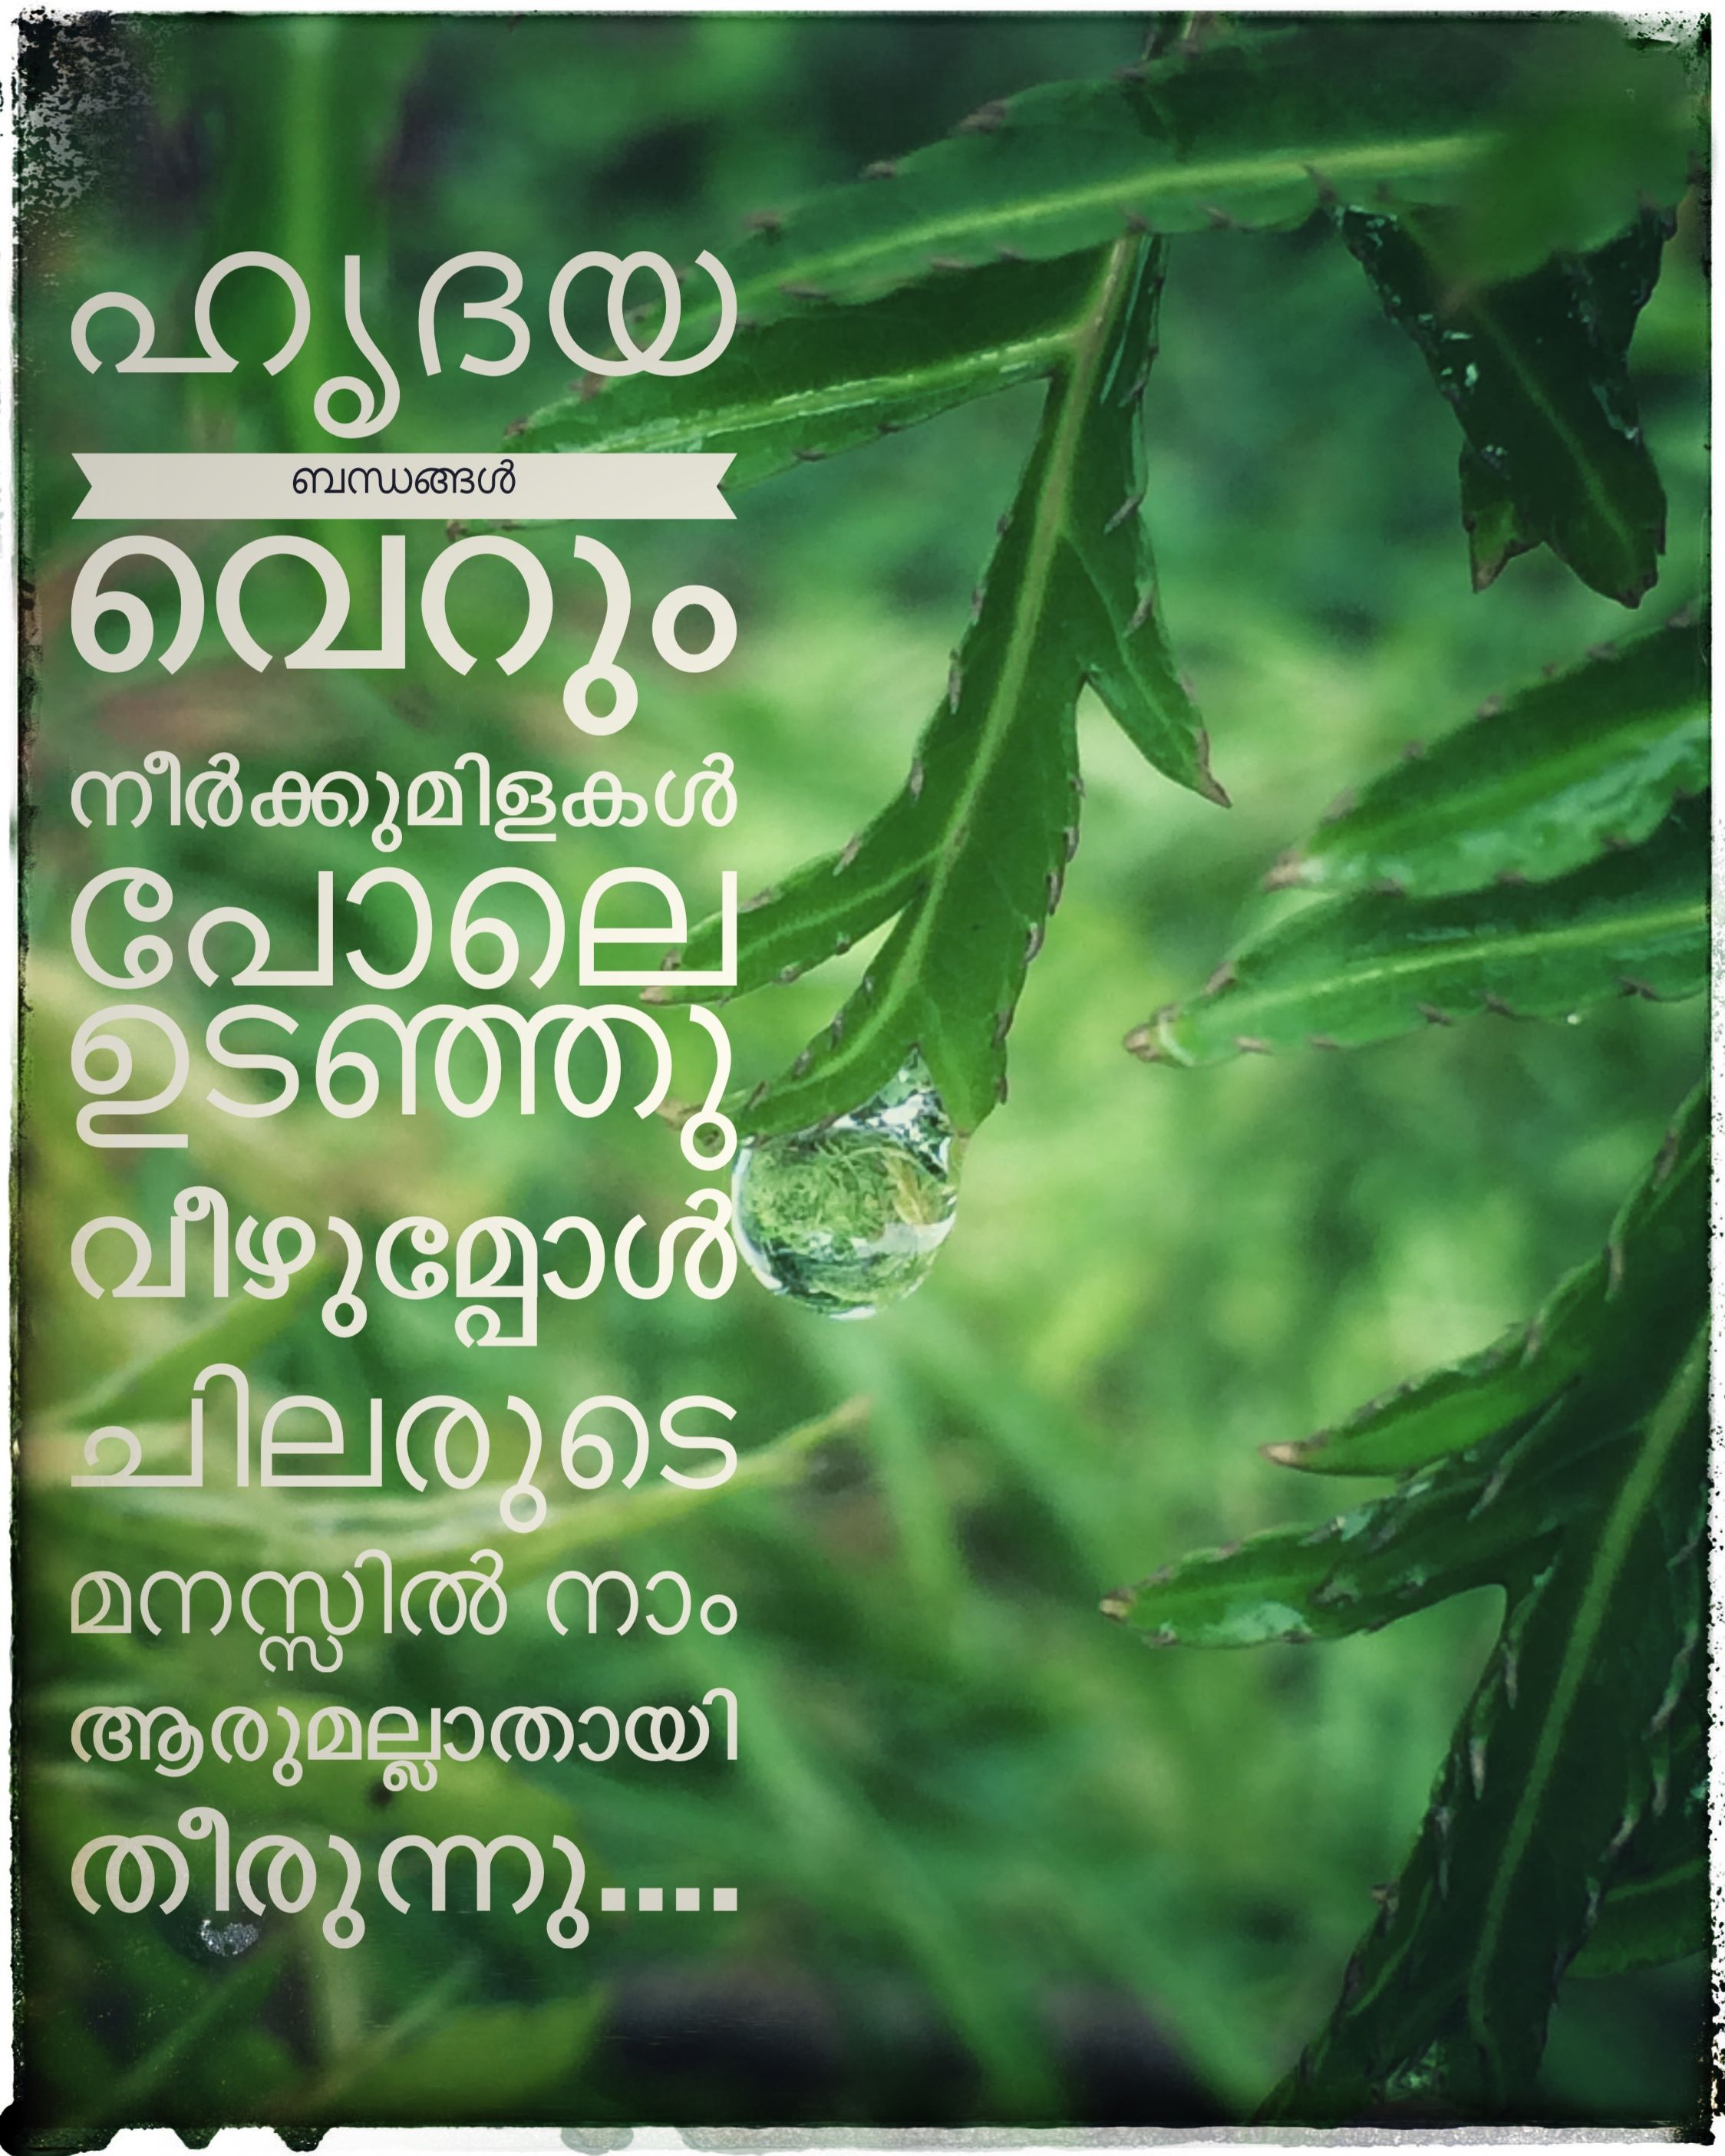 50229216 Malayalam Quote Sad Quotes Malayalam 707543 Hd Wallpaper Backgrounds Download 70 sad feeling images with quotes. 50229216 malayalam quote sad quotes